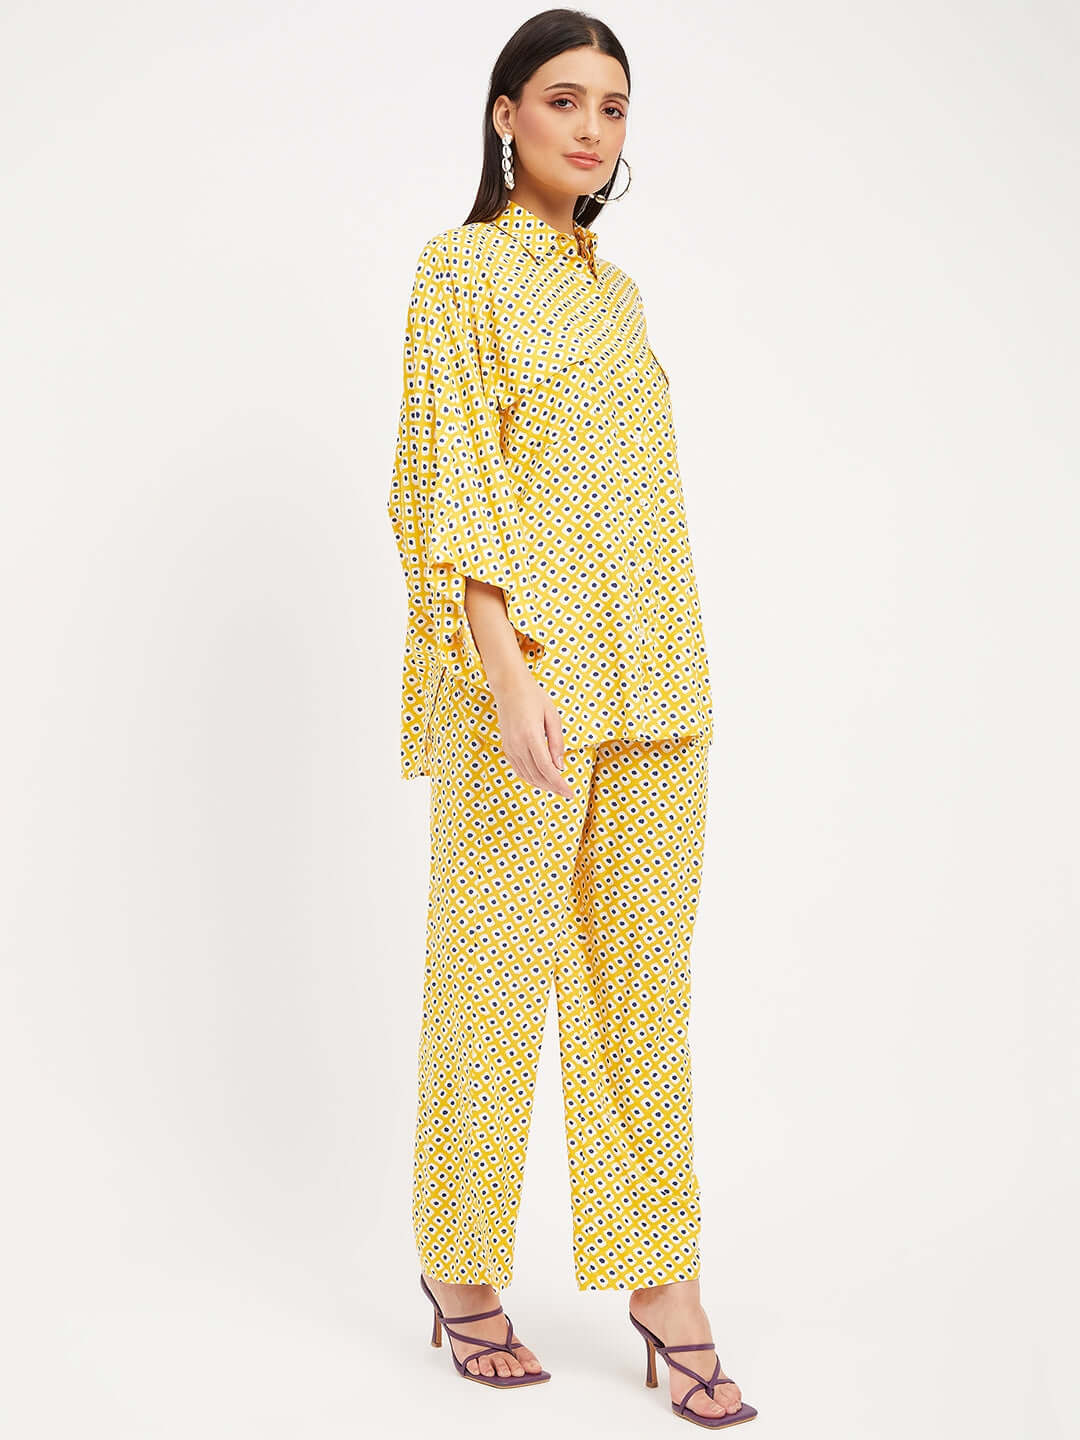 YELLOW PRINTED CO-ORD SETS | FREE SIZE - Antimony